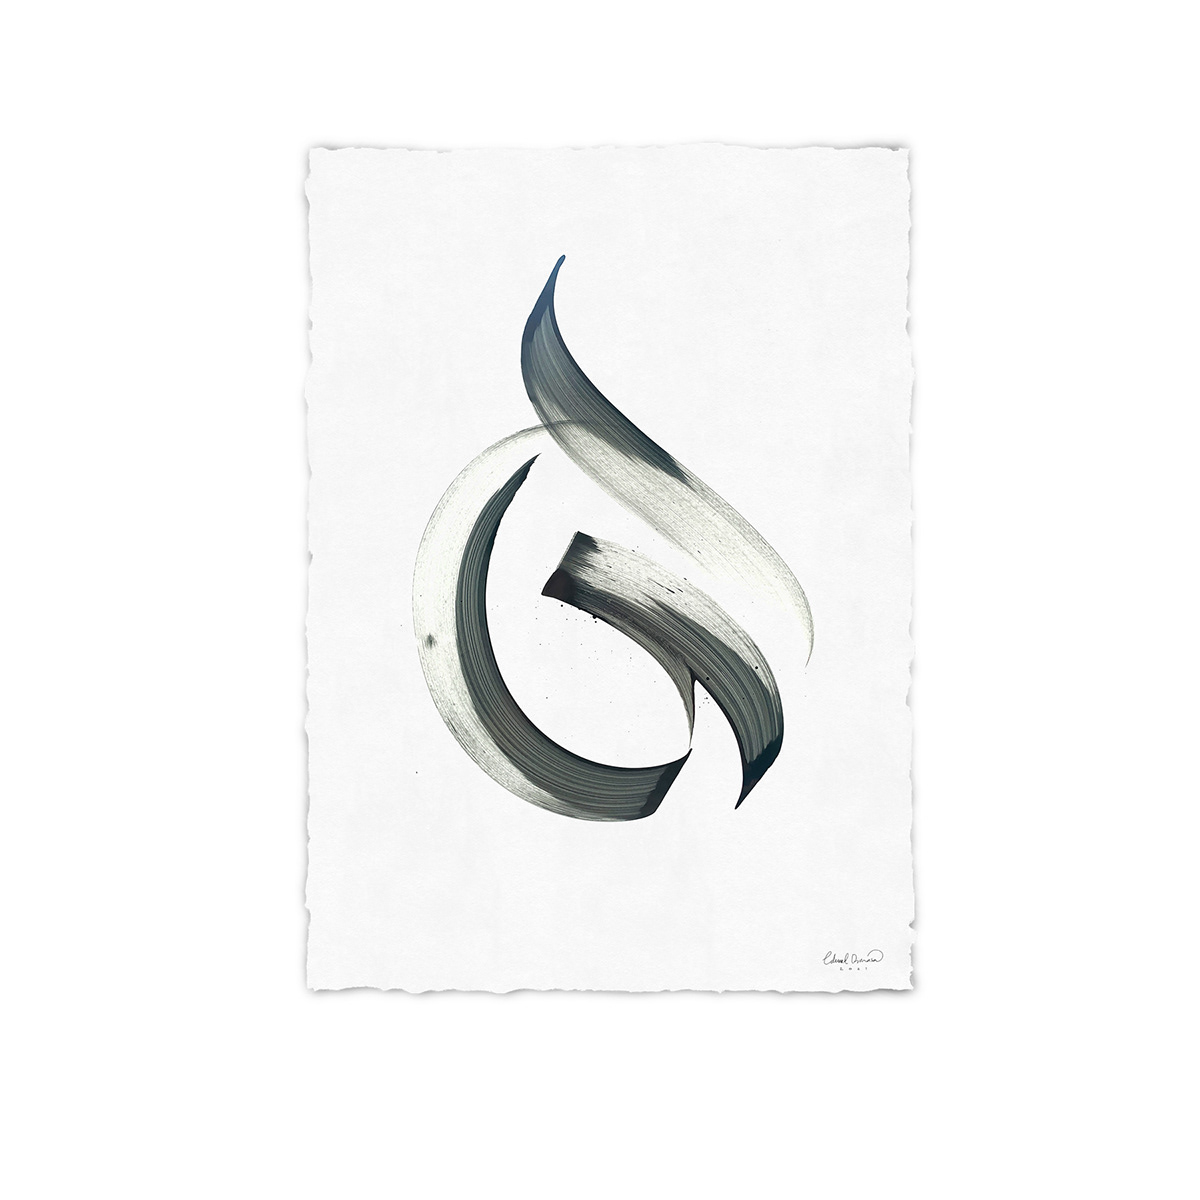 abstract Abstract Art abstract calligraphy arabic calligraphy Calligraphy   dimasov Russia